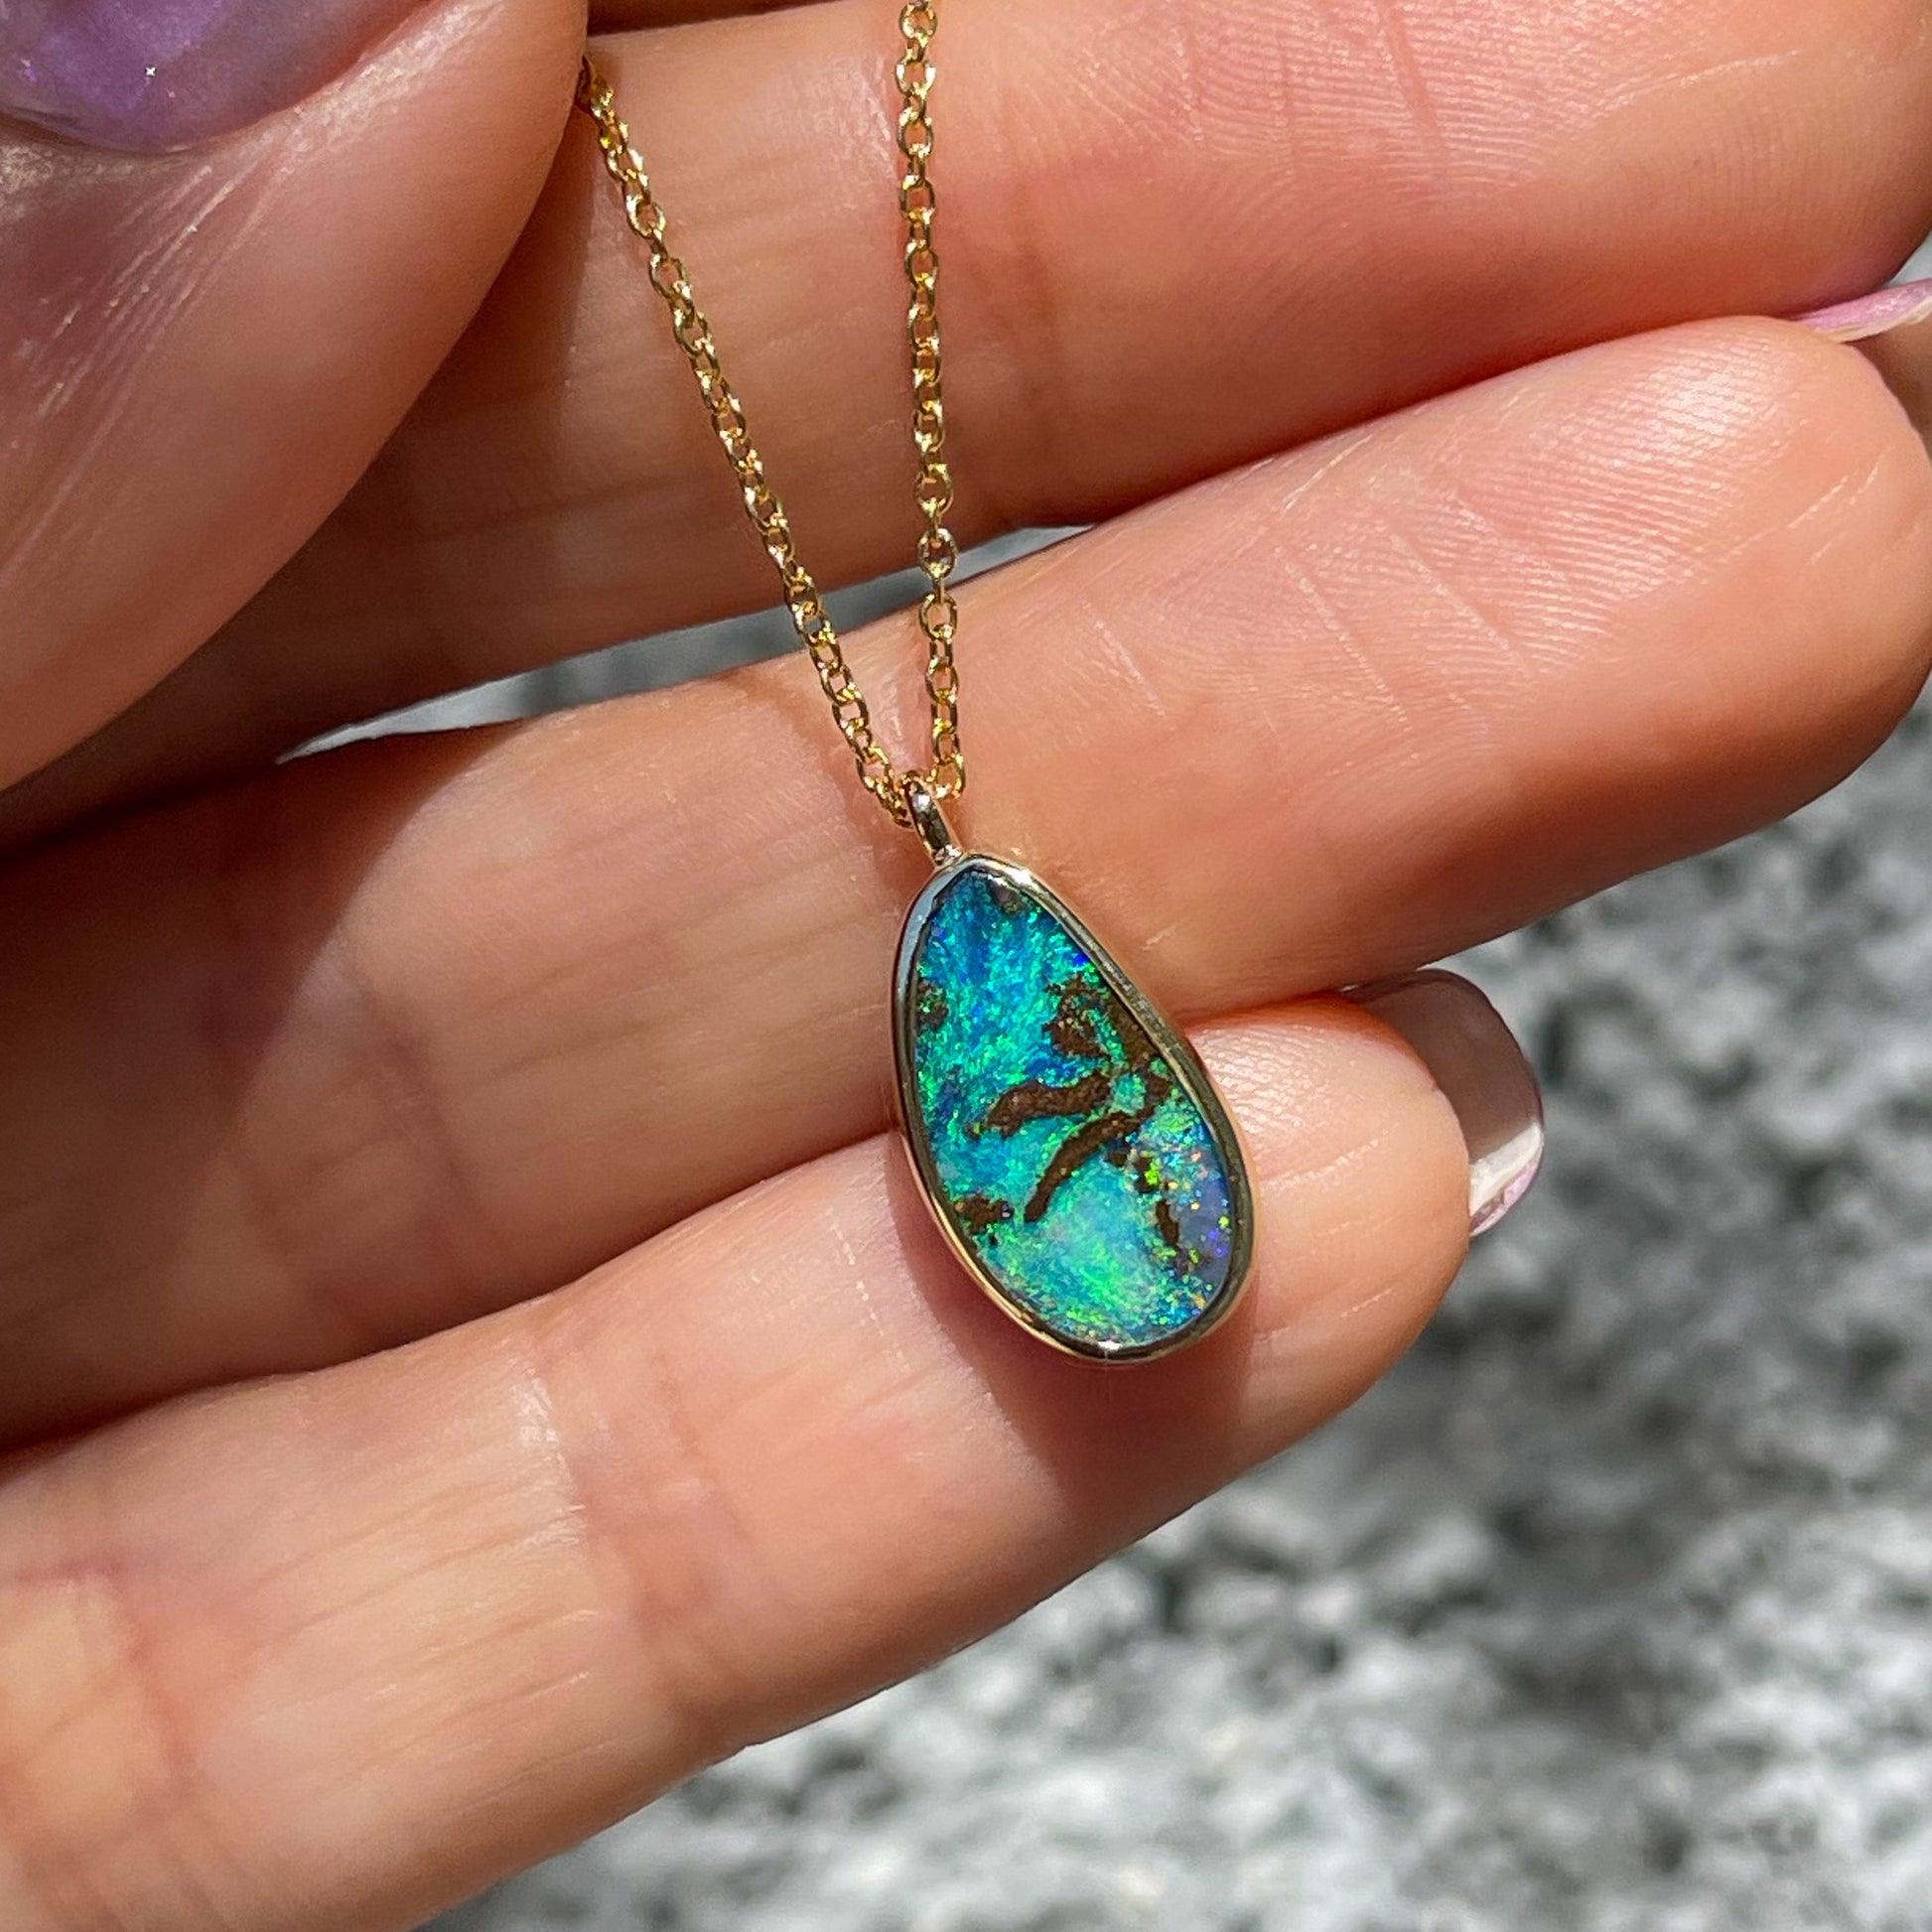 An Australian Opal Necklace by NIXIN Jewelry resting on top of a hand in sunlight. The Boulder Opal is set in yellow gold and is perfect for rare jewelry collectors.